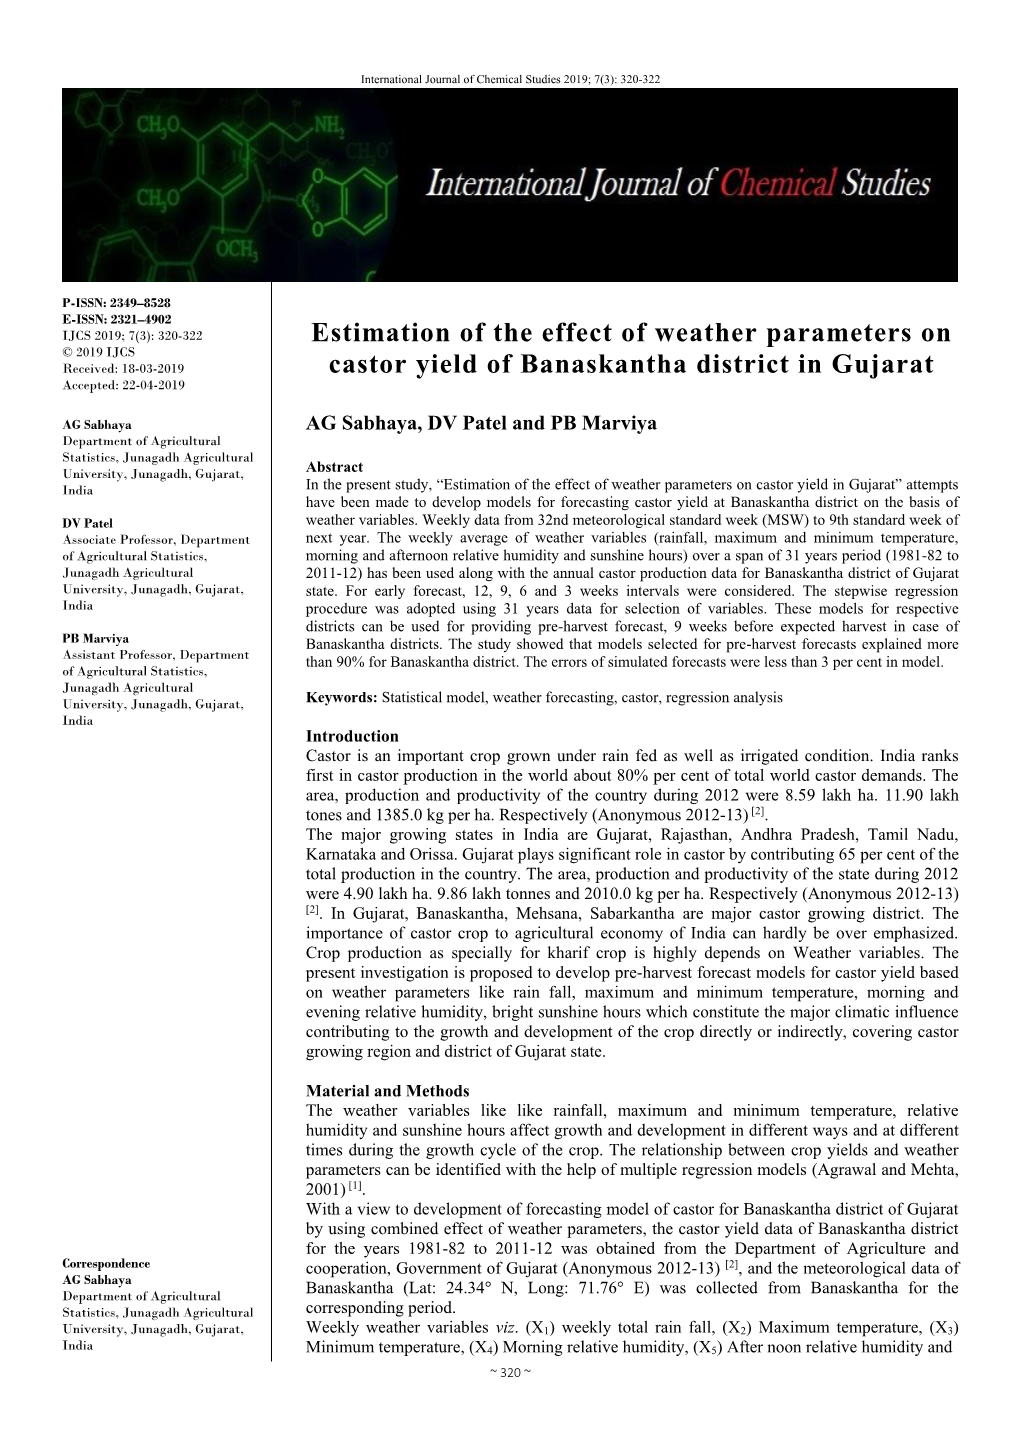 Estimation of the Effect of Weather Parameters on Castor Yield Of